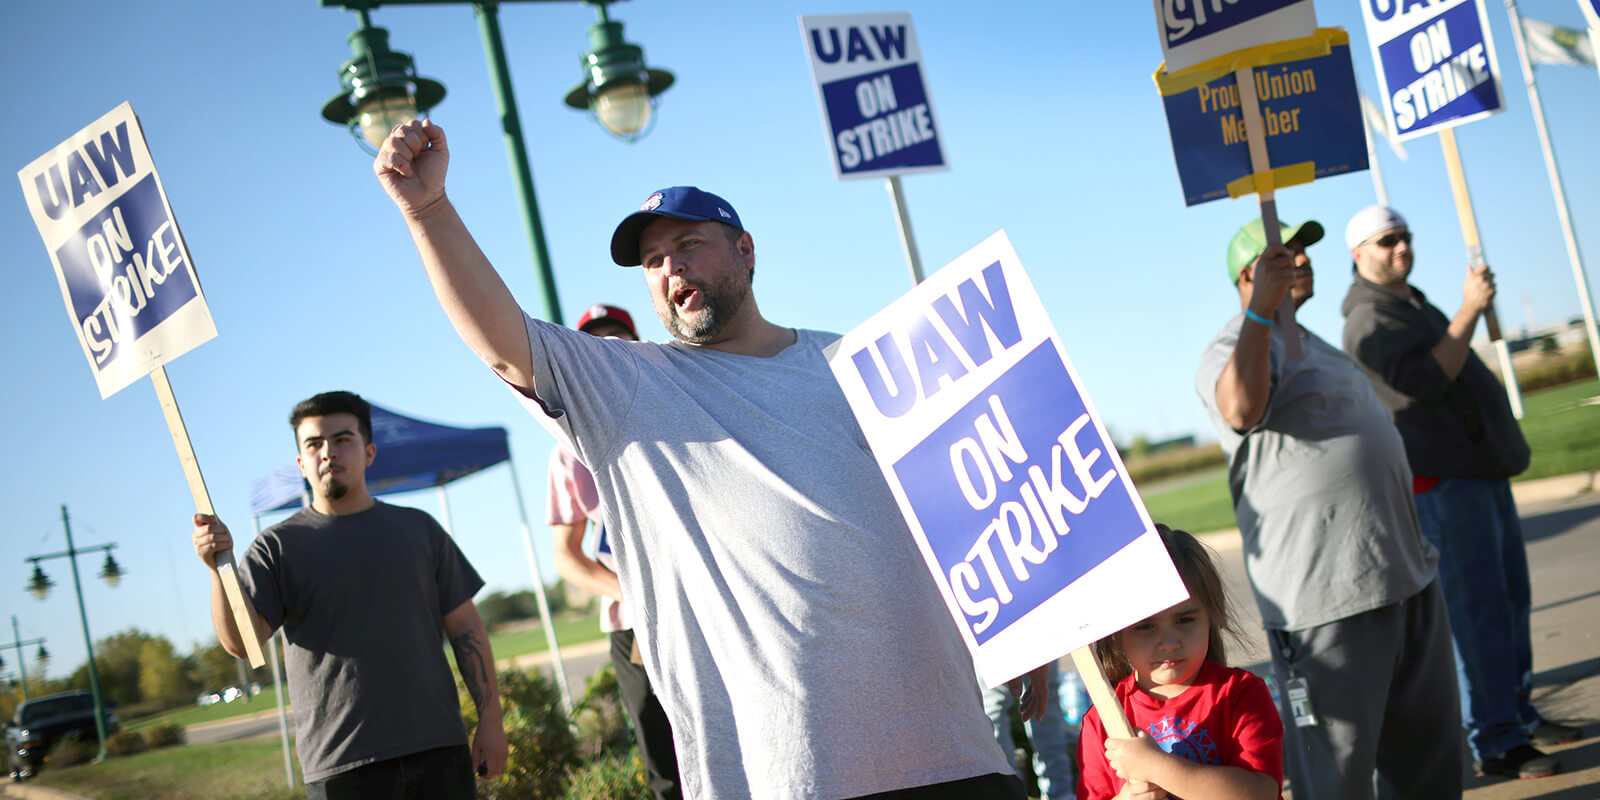 John Deere strike ends with big gains for workers